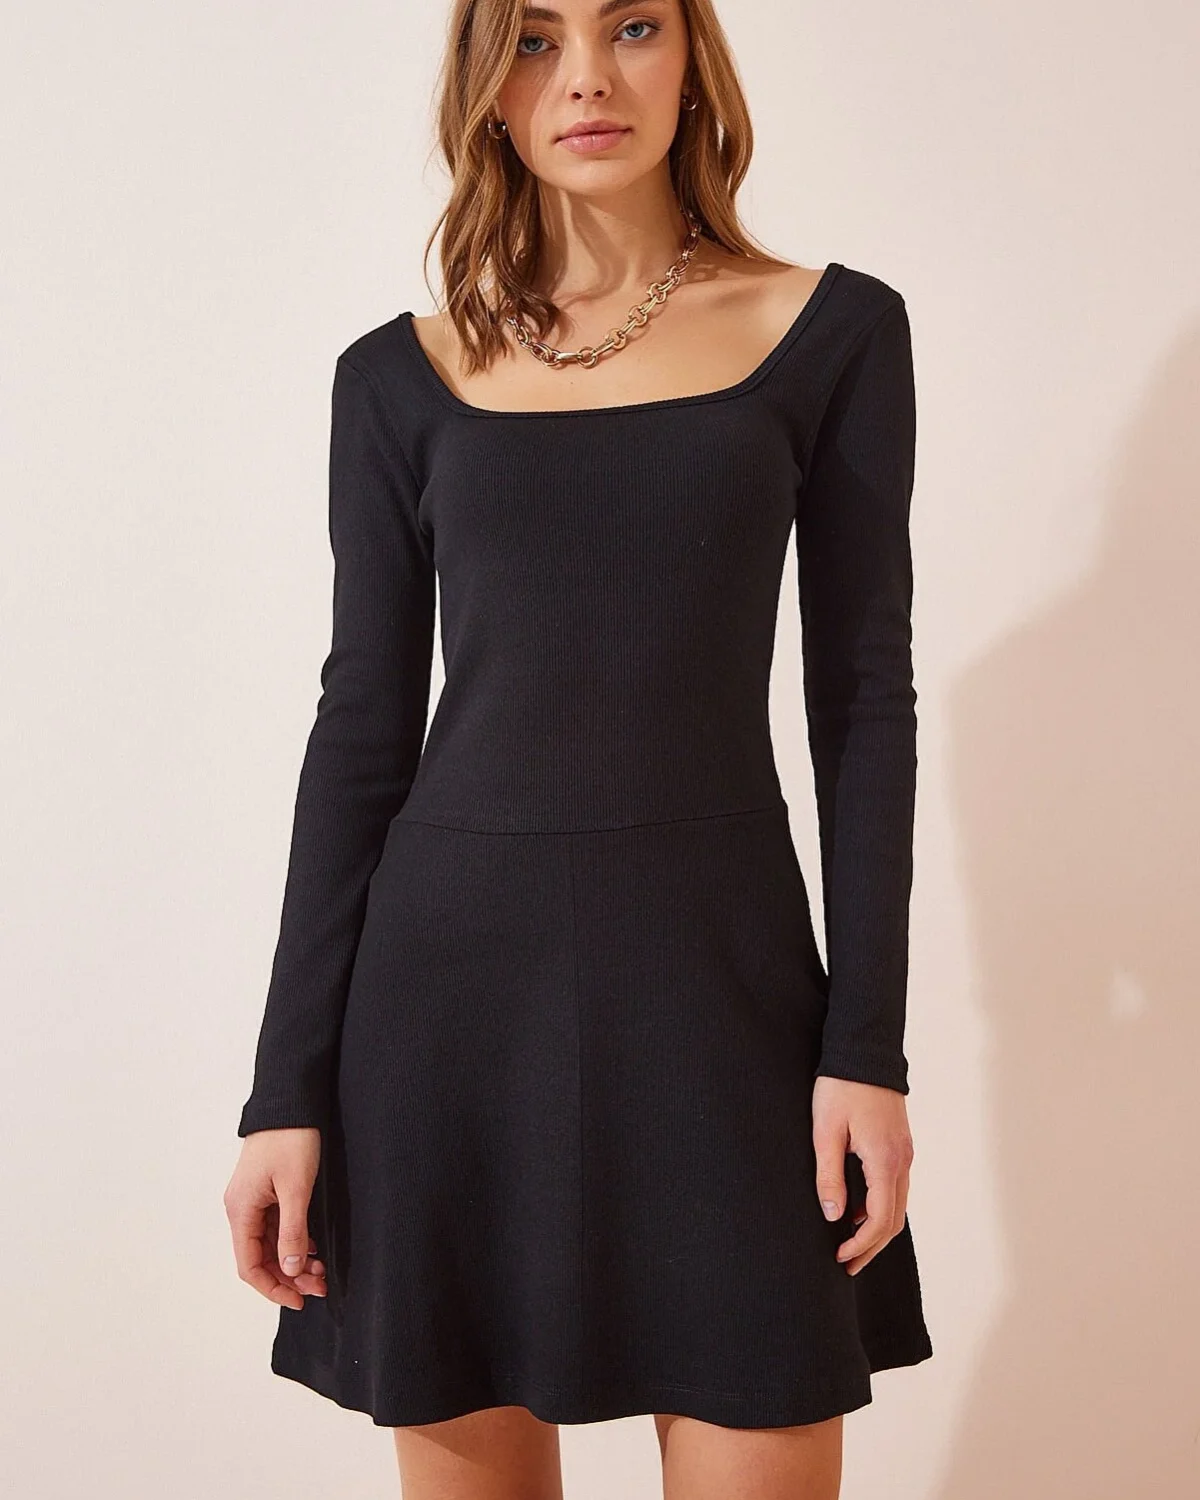 Happiness Istanbul Collection Black Dress for Women by Picks for Less